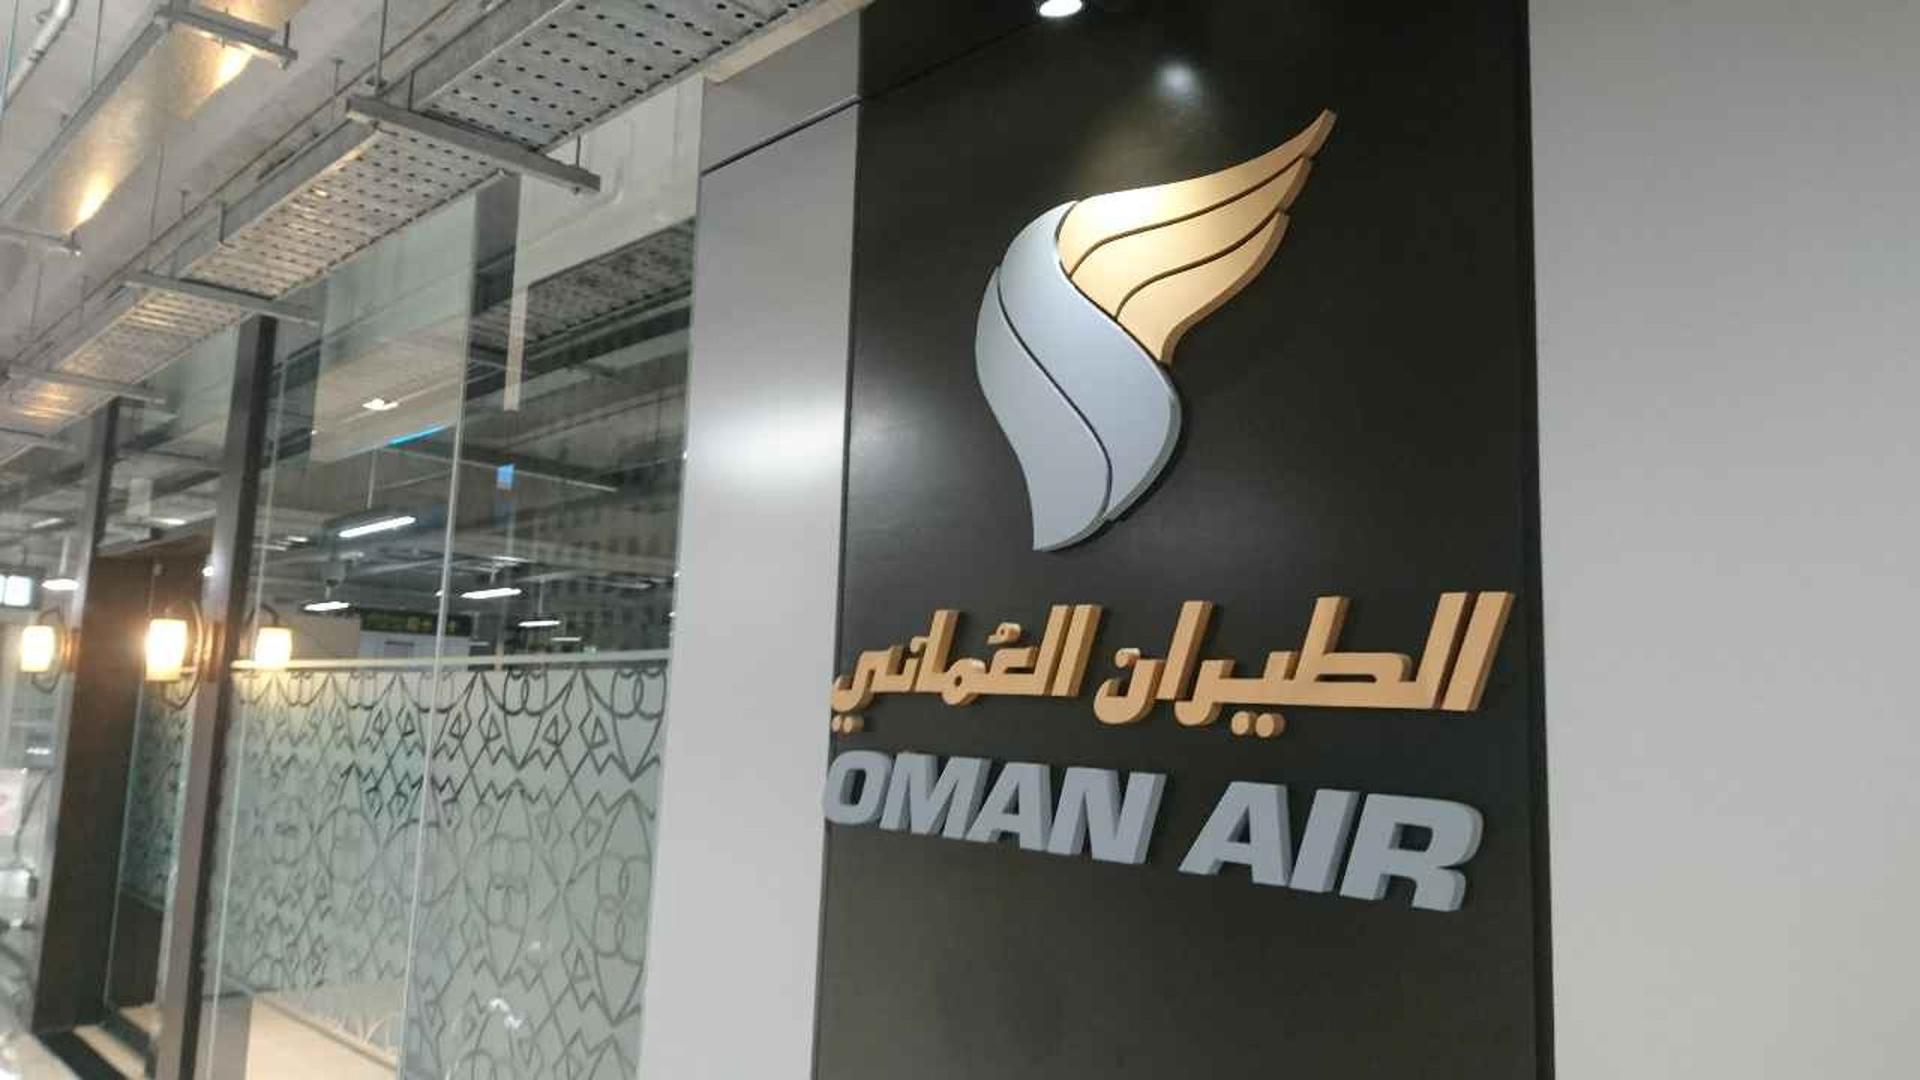 Oman Air First and Business Class Lounge image 21 of 50